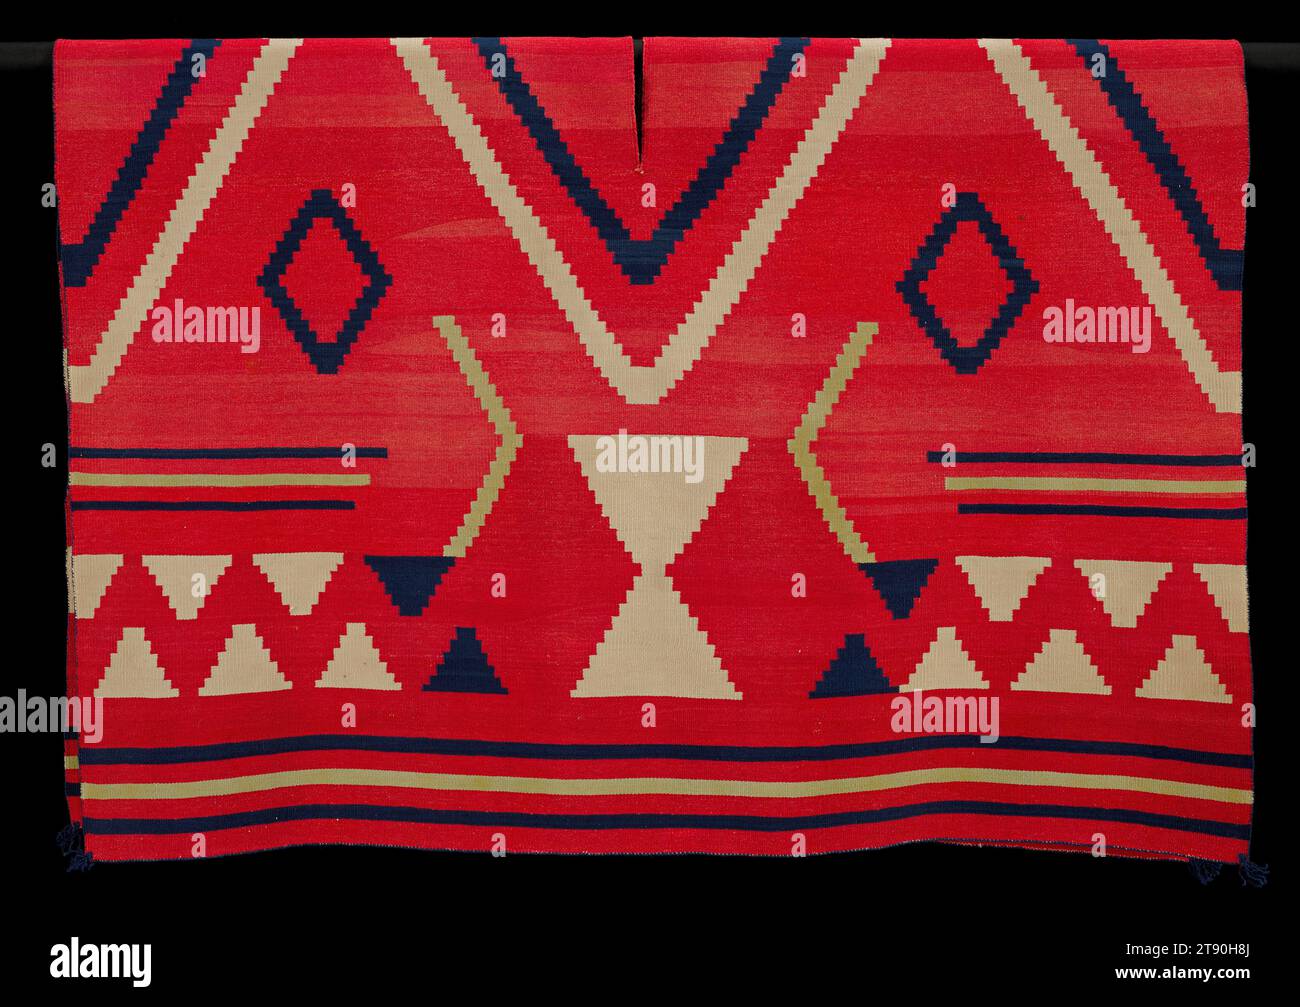 Poncho serape, c. 1860, 72 × 52 in. (182.88 × 132.08 cm) (overall, with fringe), Wool, dye, United States, 19th century, This poncho serape, made by a Navajo woman around 1860, was worn as an outer garment. The wearer would put his or her head through the slit in the middle of the central diamond, and the white hourglass shapes would fall over the arms. The pattern is emblematic of hózhǫ́, a fundamental Navajo concept emphasizing the connection among beauty, symmetry, health, and harmony. Other aspects of this blanket can be traced to cultural and economic exchanges with Spanish Stock Photo